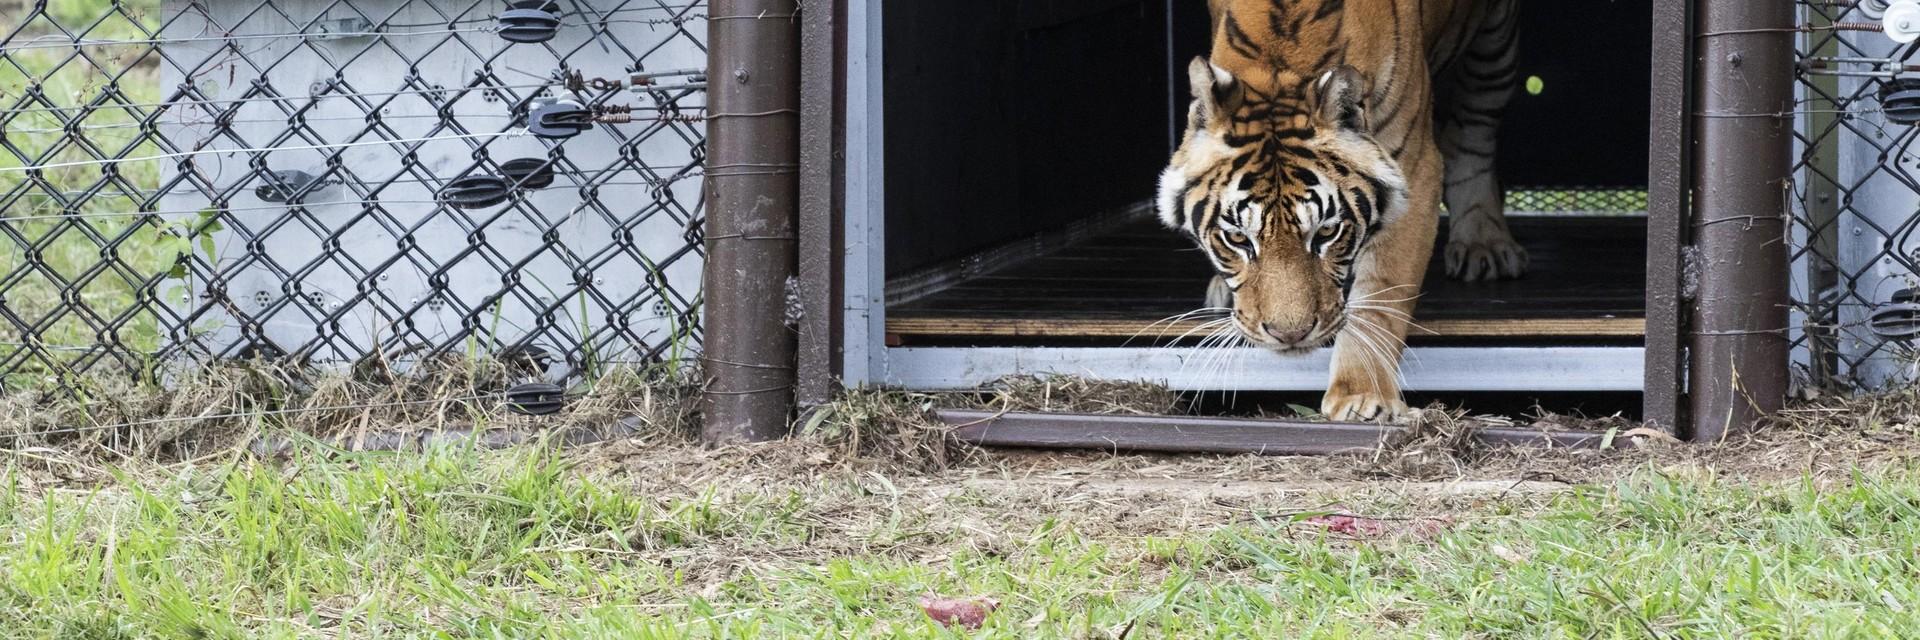 Train Tigers' feel grass under their paws for the first time 